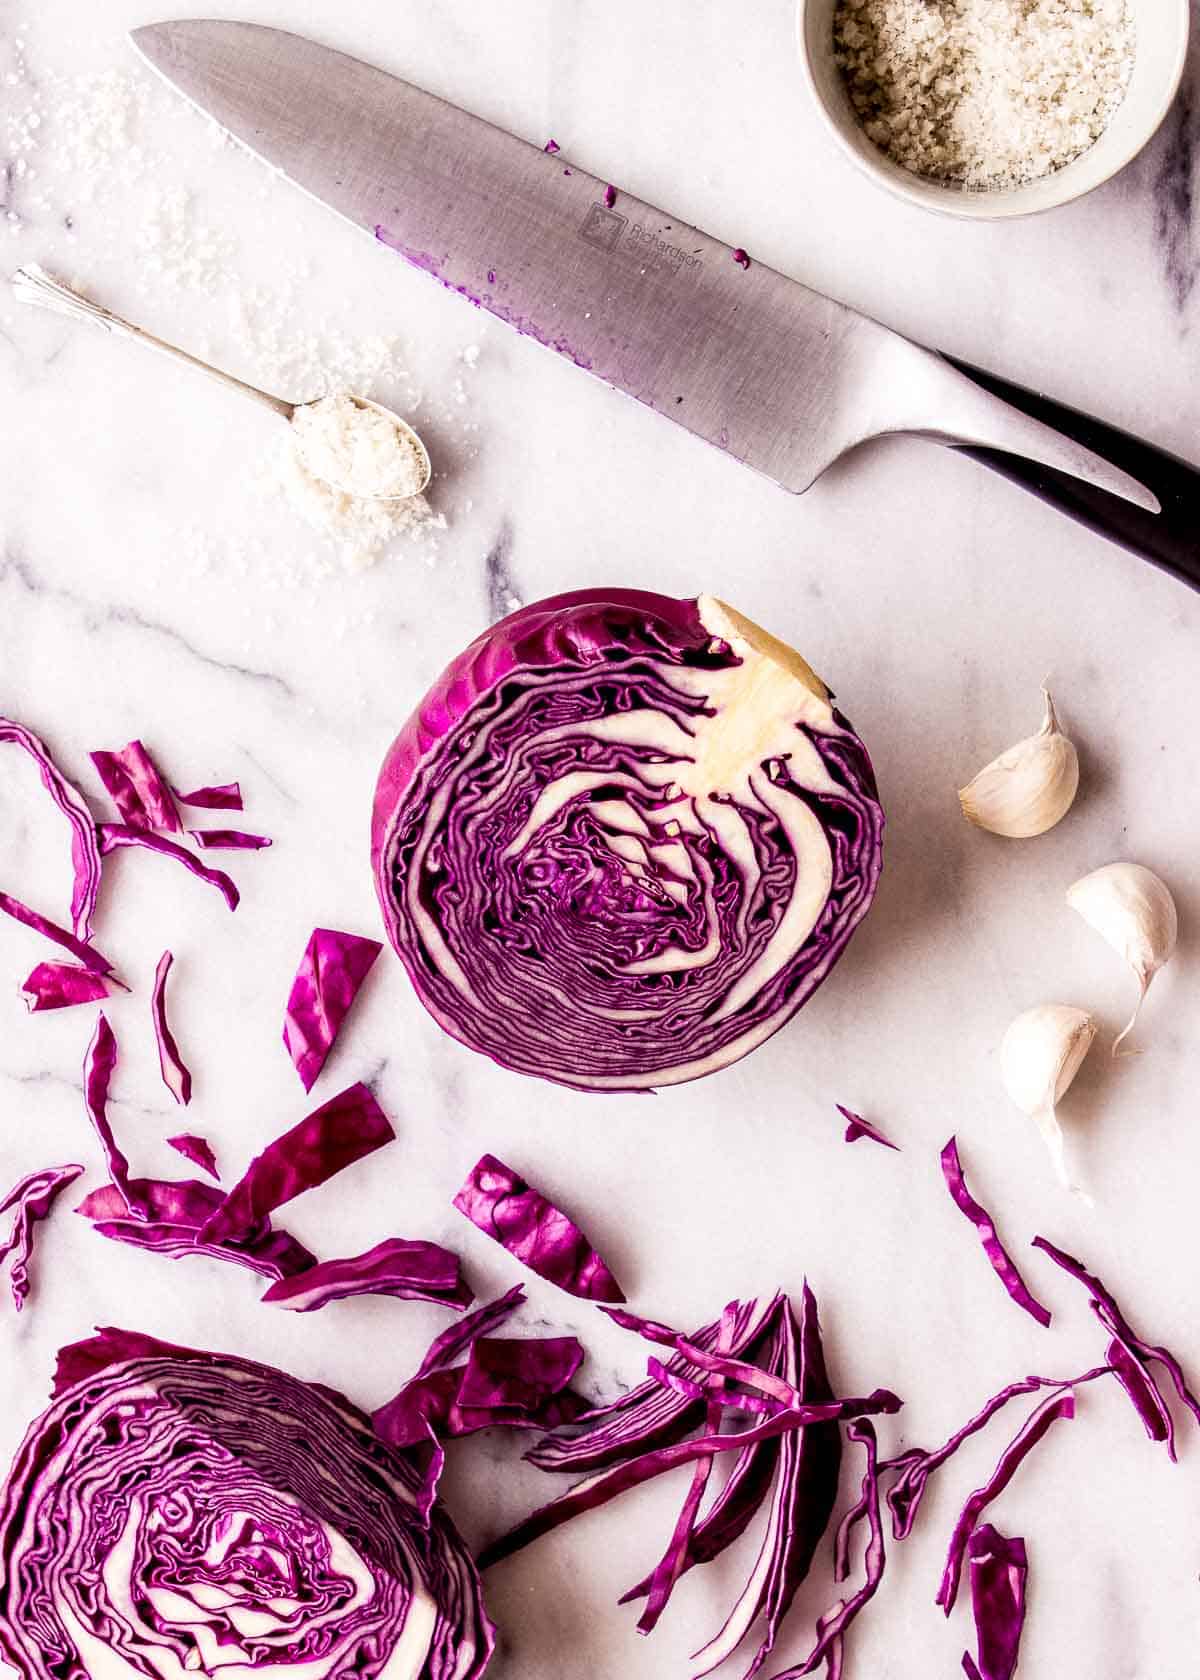 Ingredients for sauerkraut with red cabbage on a marble slab